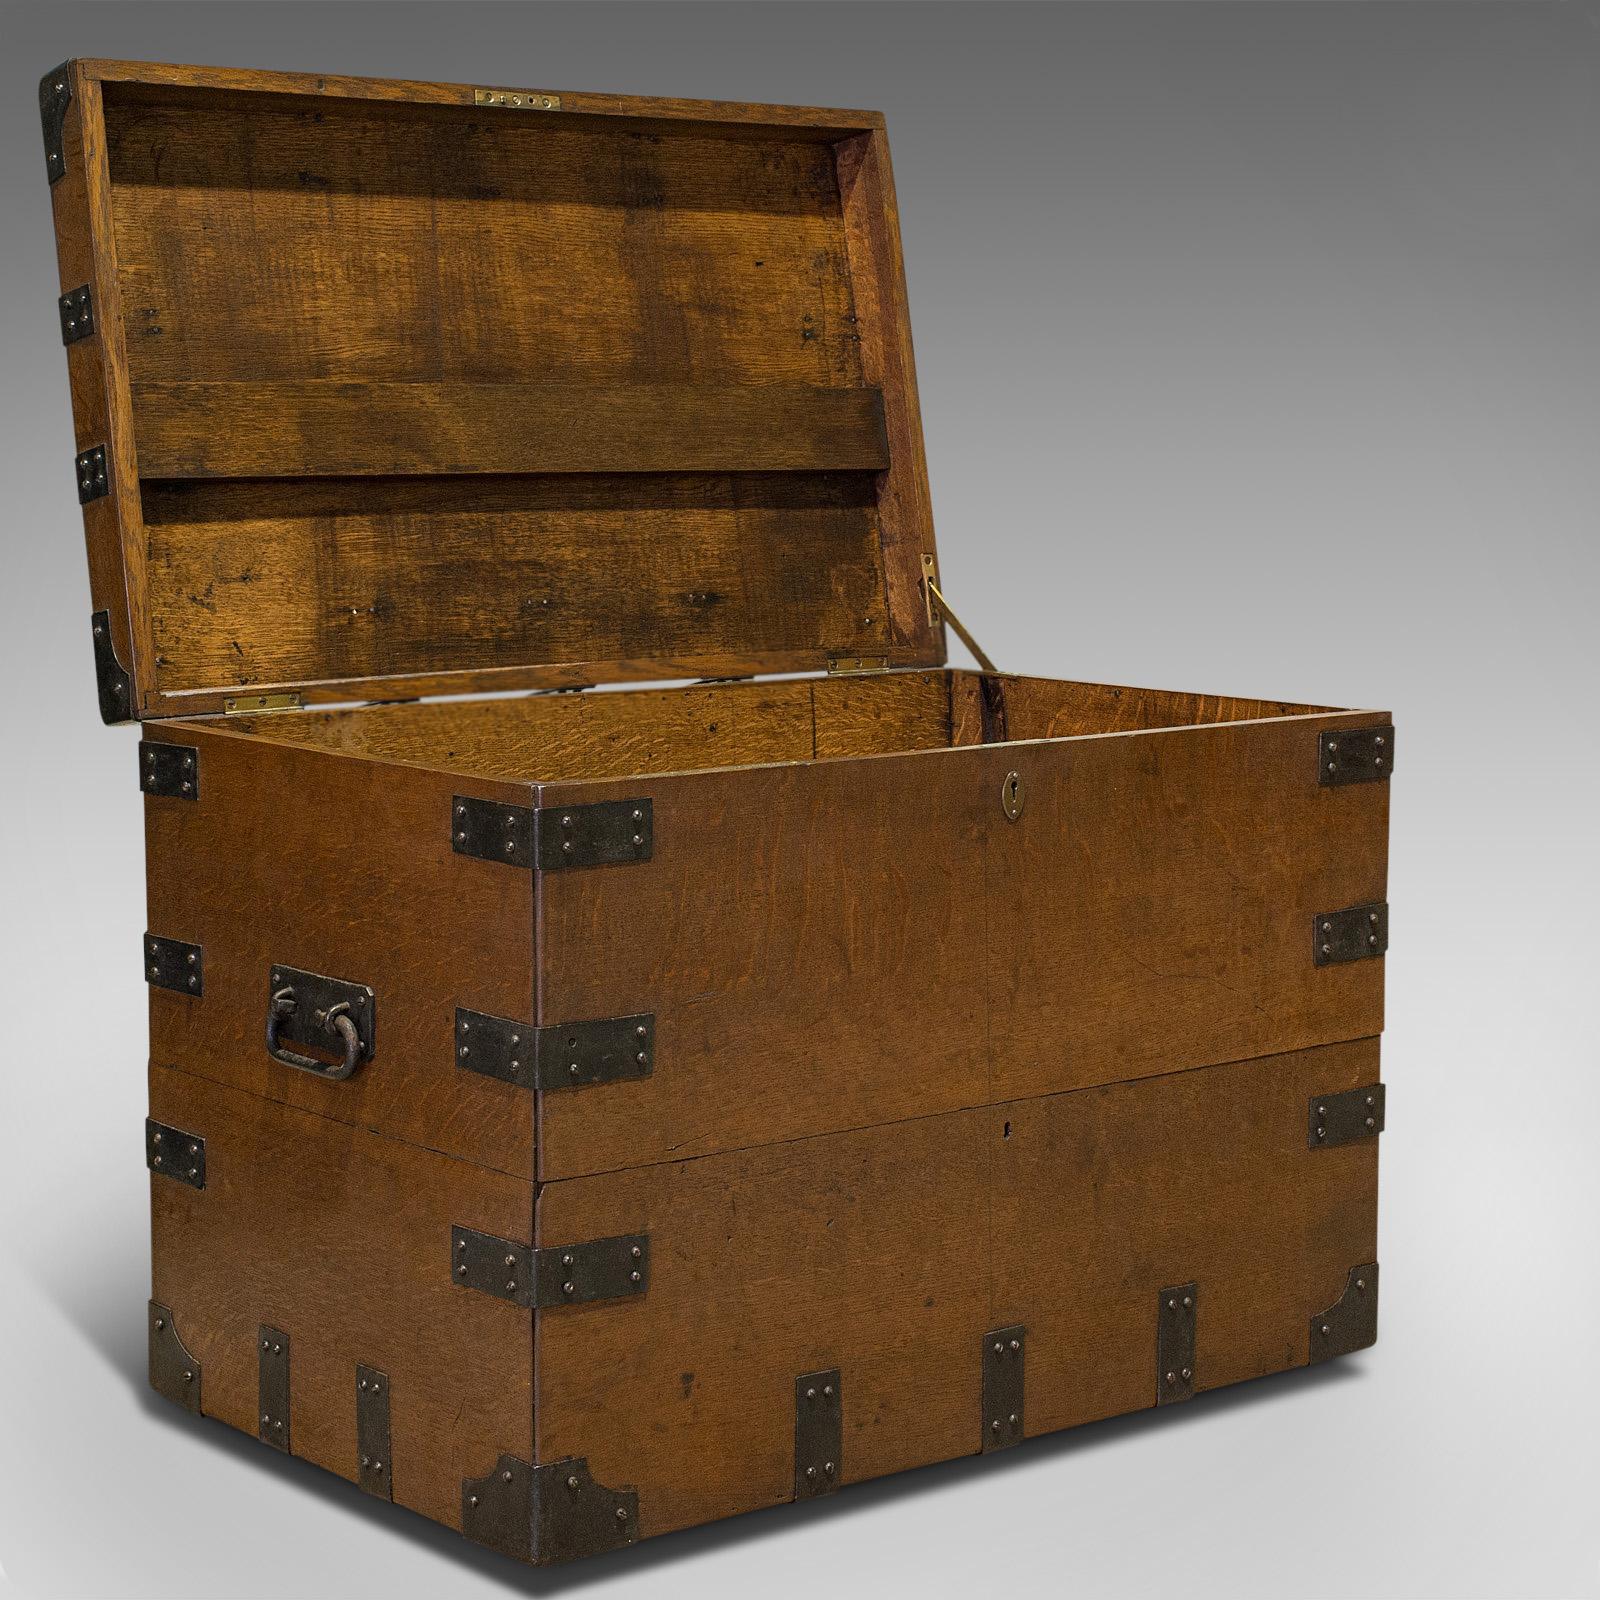 This is an antique silver chest. An English, oak and iron bound trunk, by Elkington and Co of Liverpool, dating to the late 19th century, circa 1880.

A stout, appealing chest
Displays a desirable aged patina
Select oak shows fine grain interest